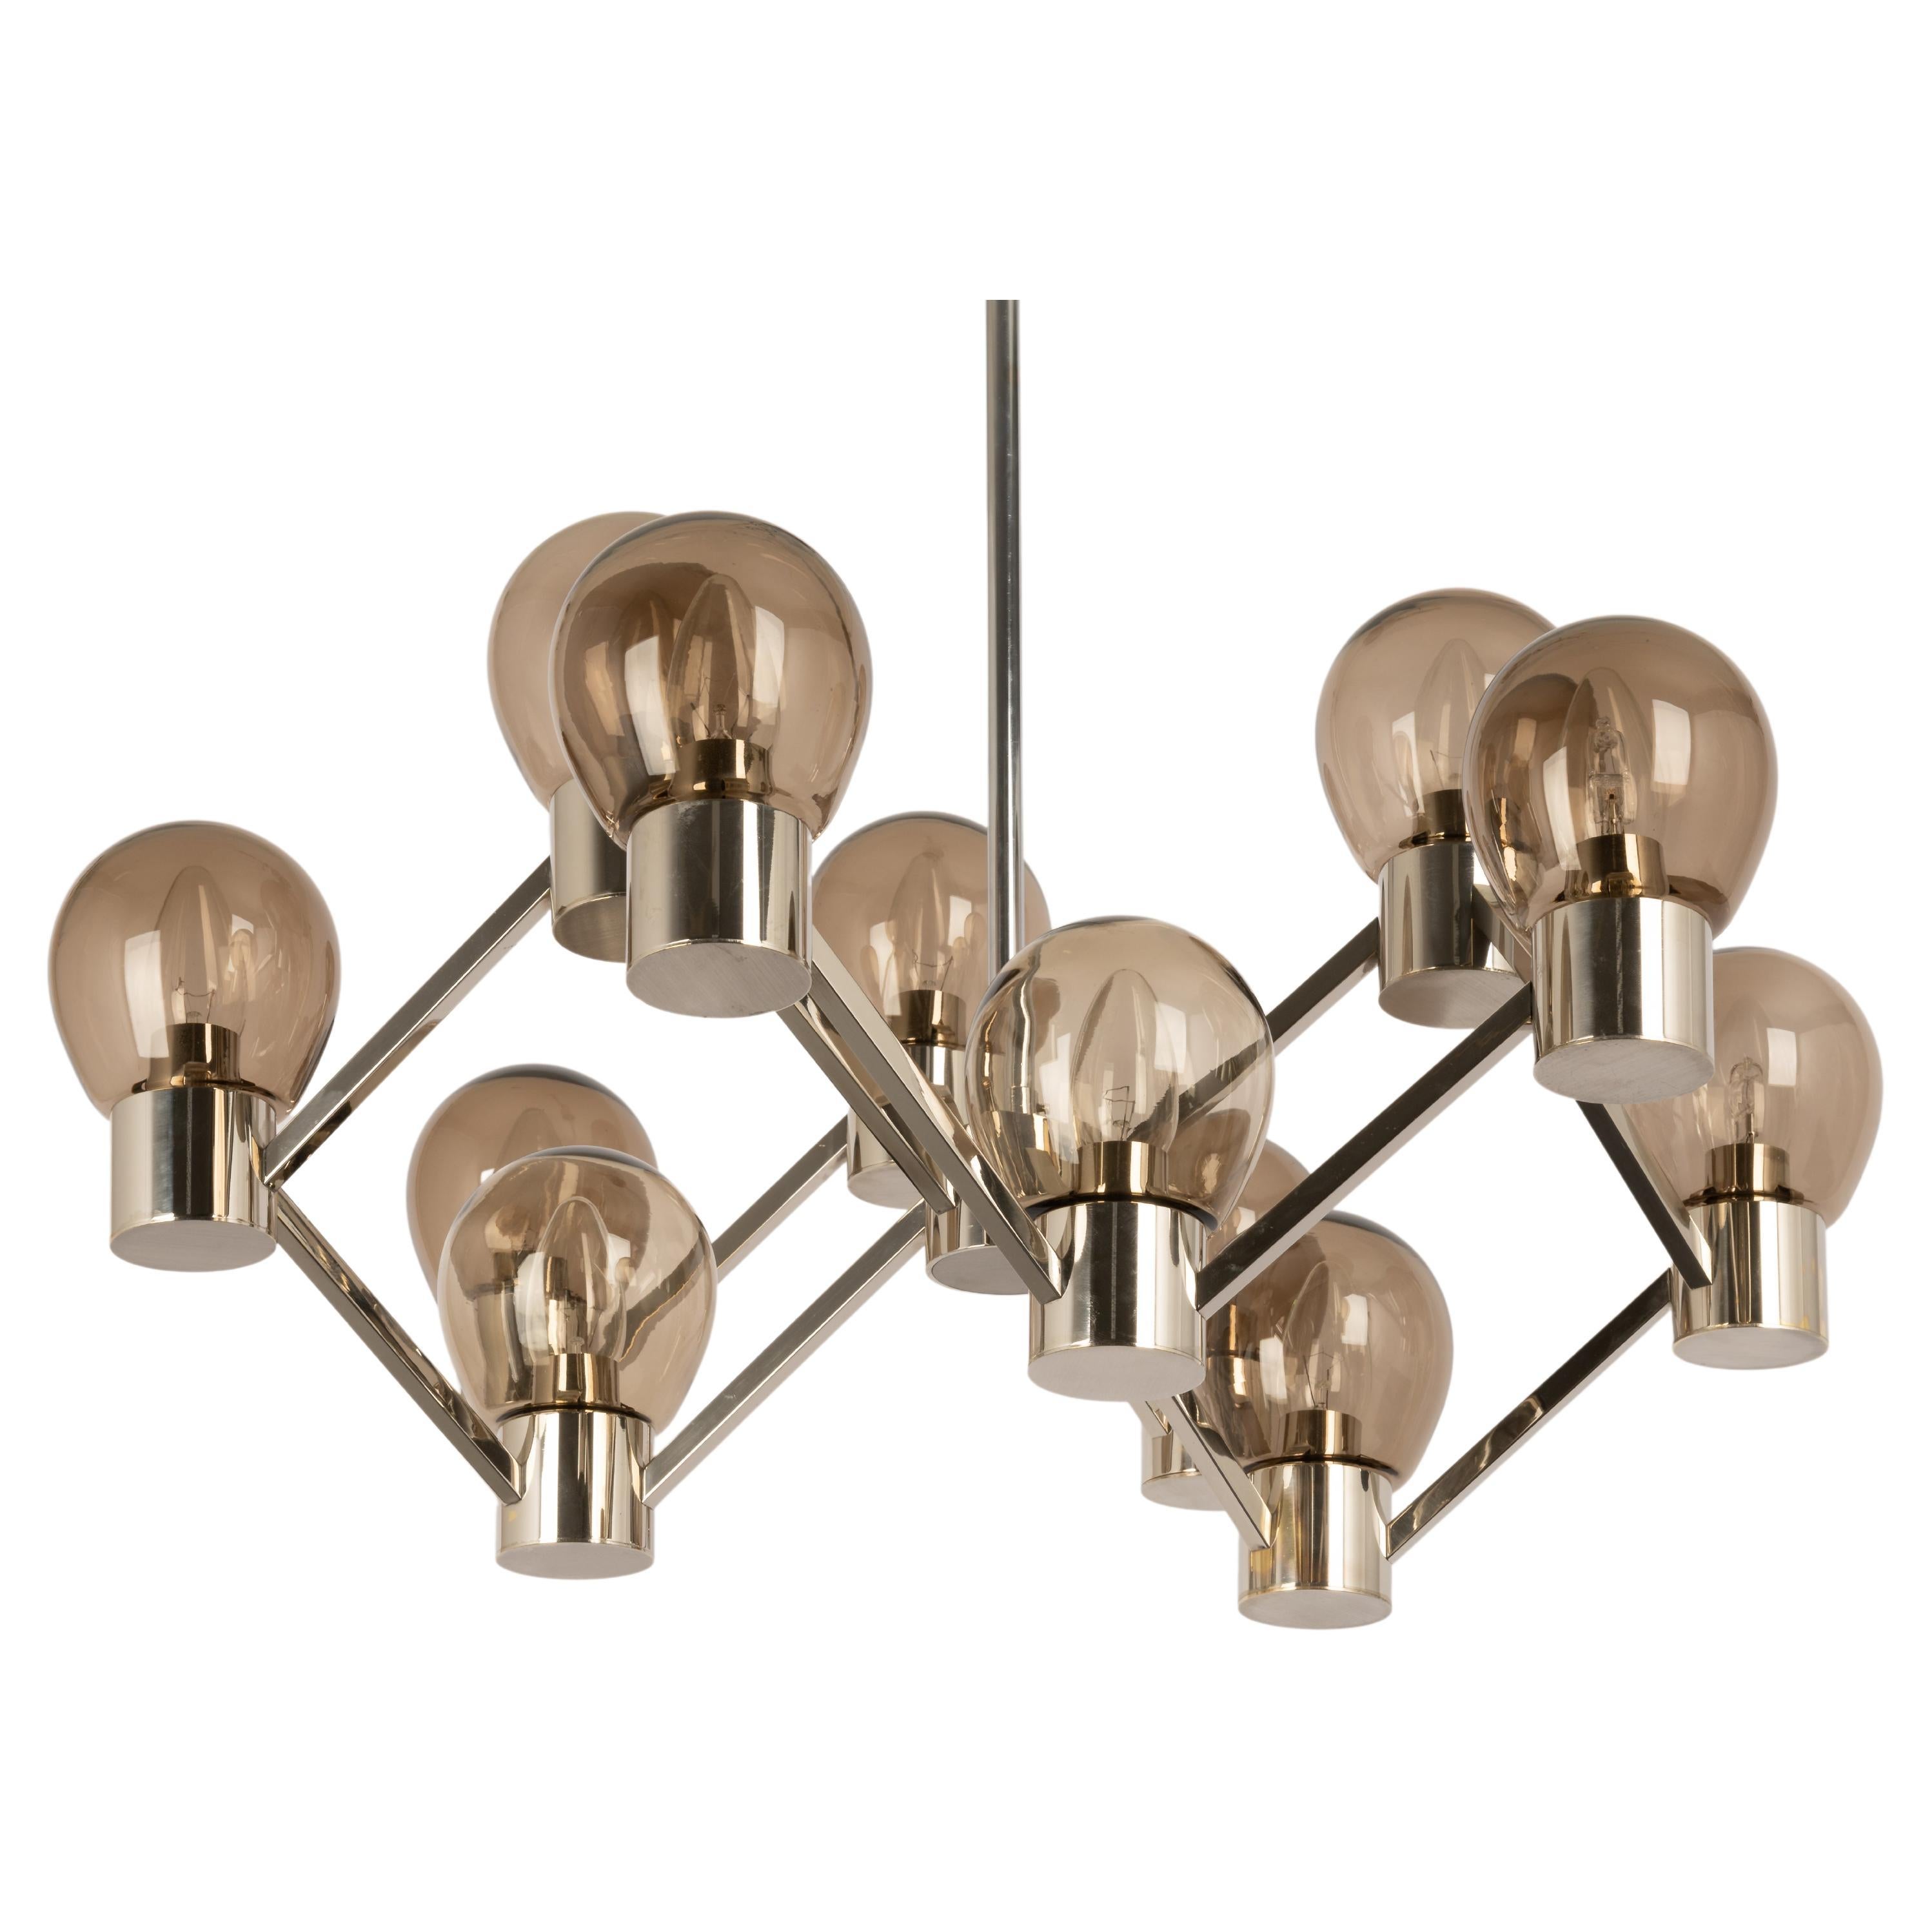 12-light Chrome chandelier in the style of Sciolari with smoked glasses.
Good quality and in good condition. Cleaned, well-wired, and ready to use. Small signs of age and use.

The fixture requires 12 x E14 Standard bulbs with 40W max each.
